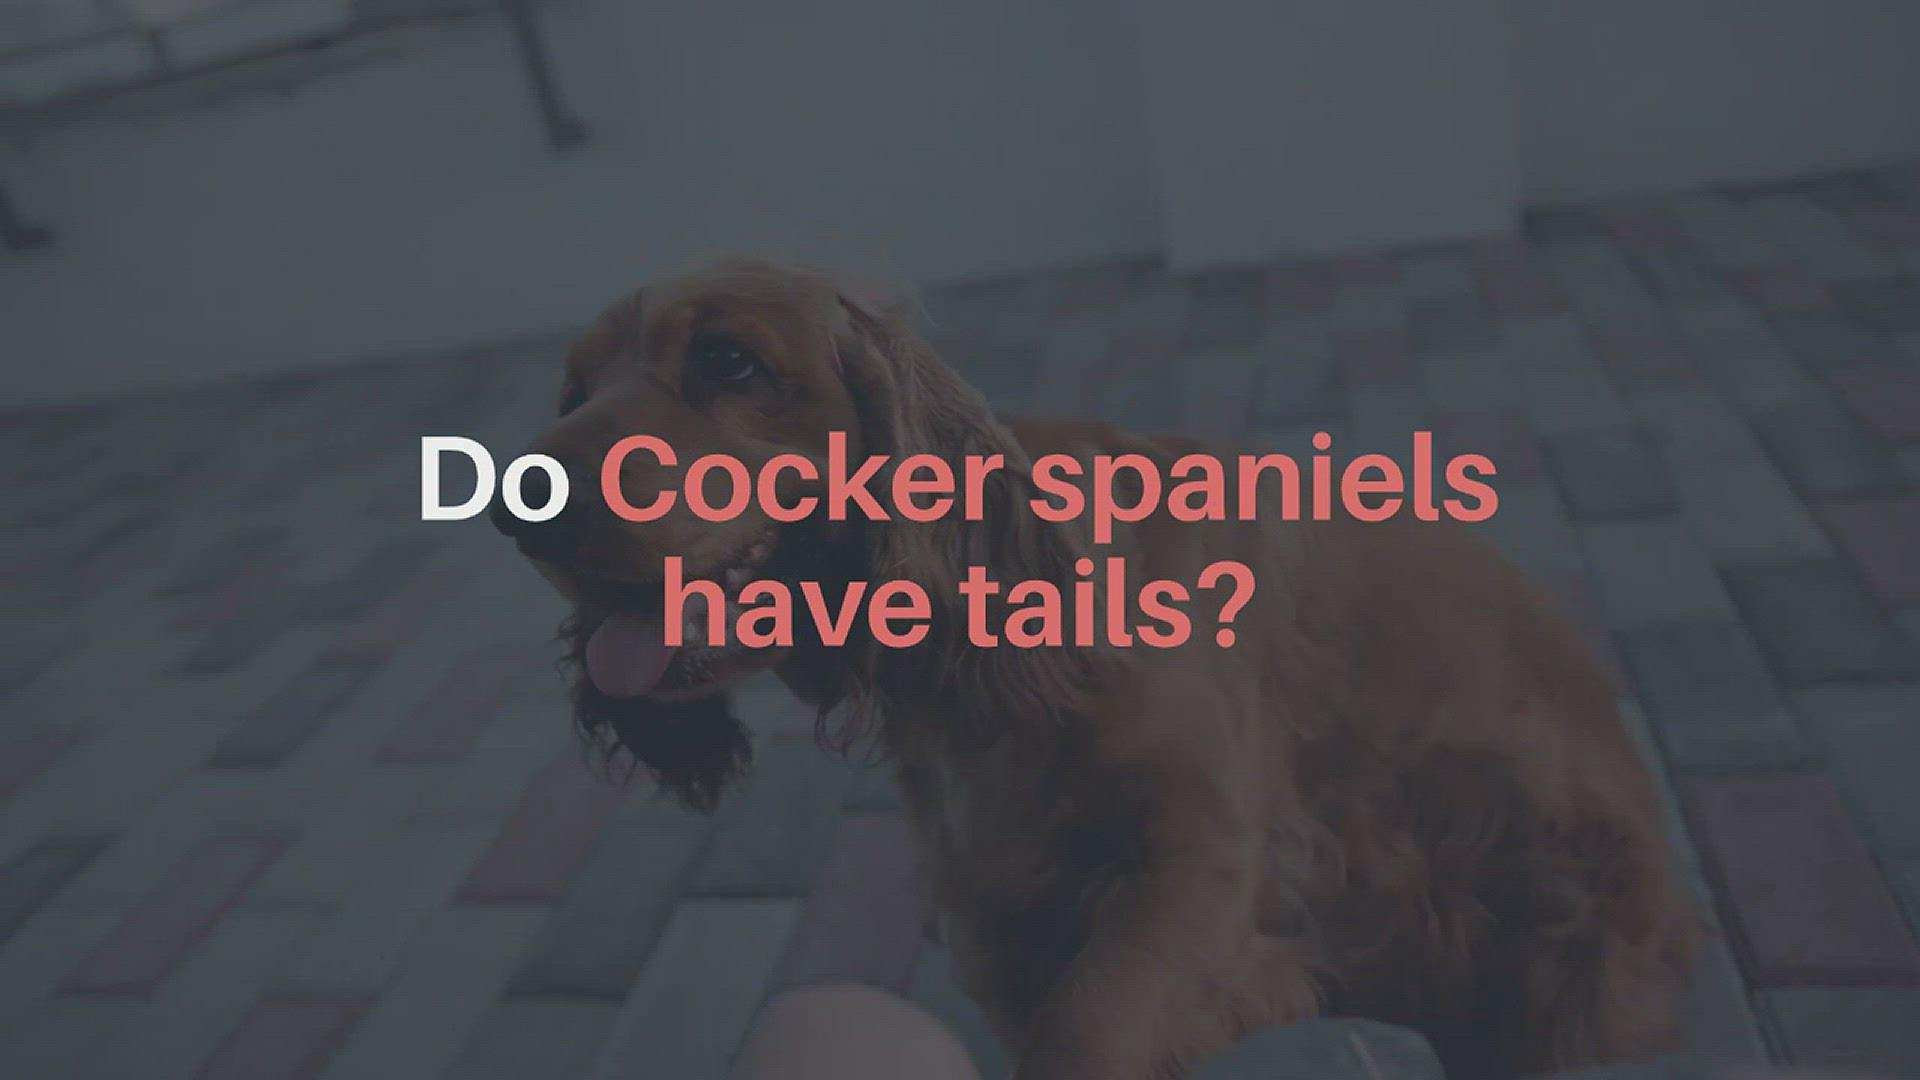 'Video thumbnail for Do Cocker spaniels have tails?'